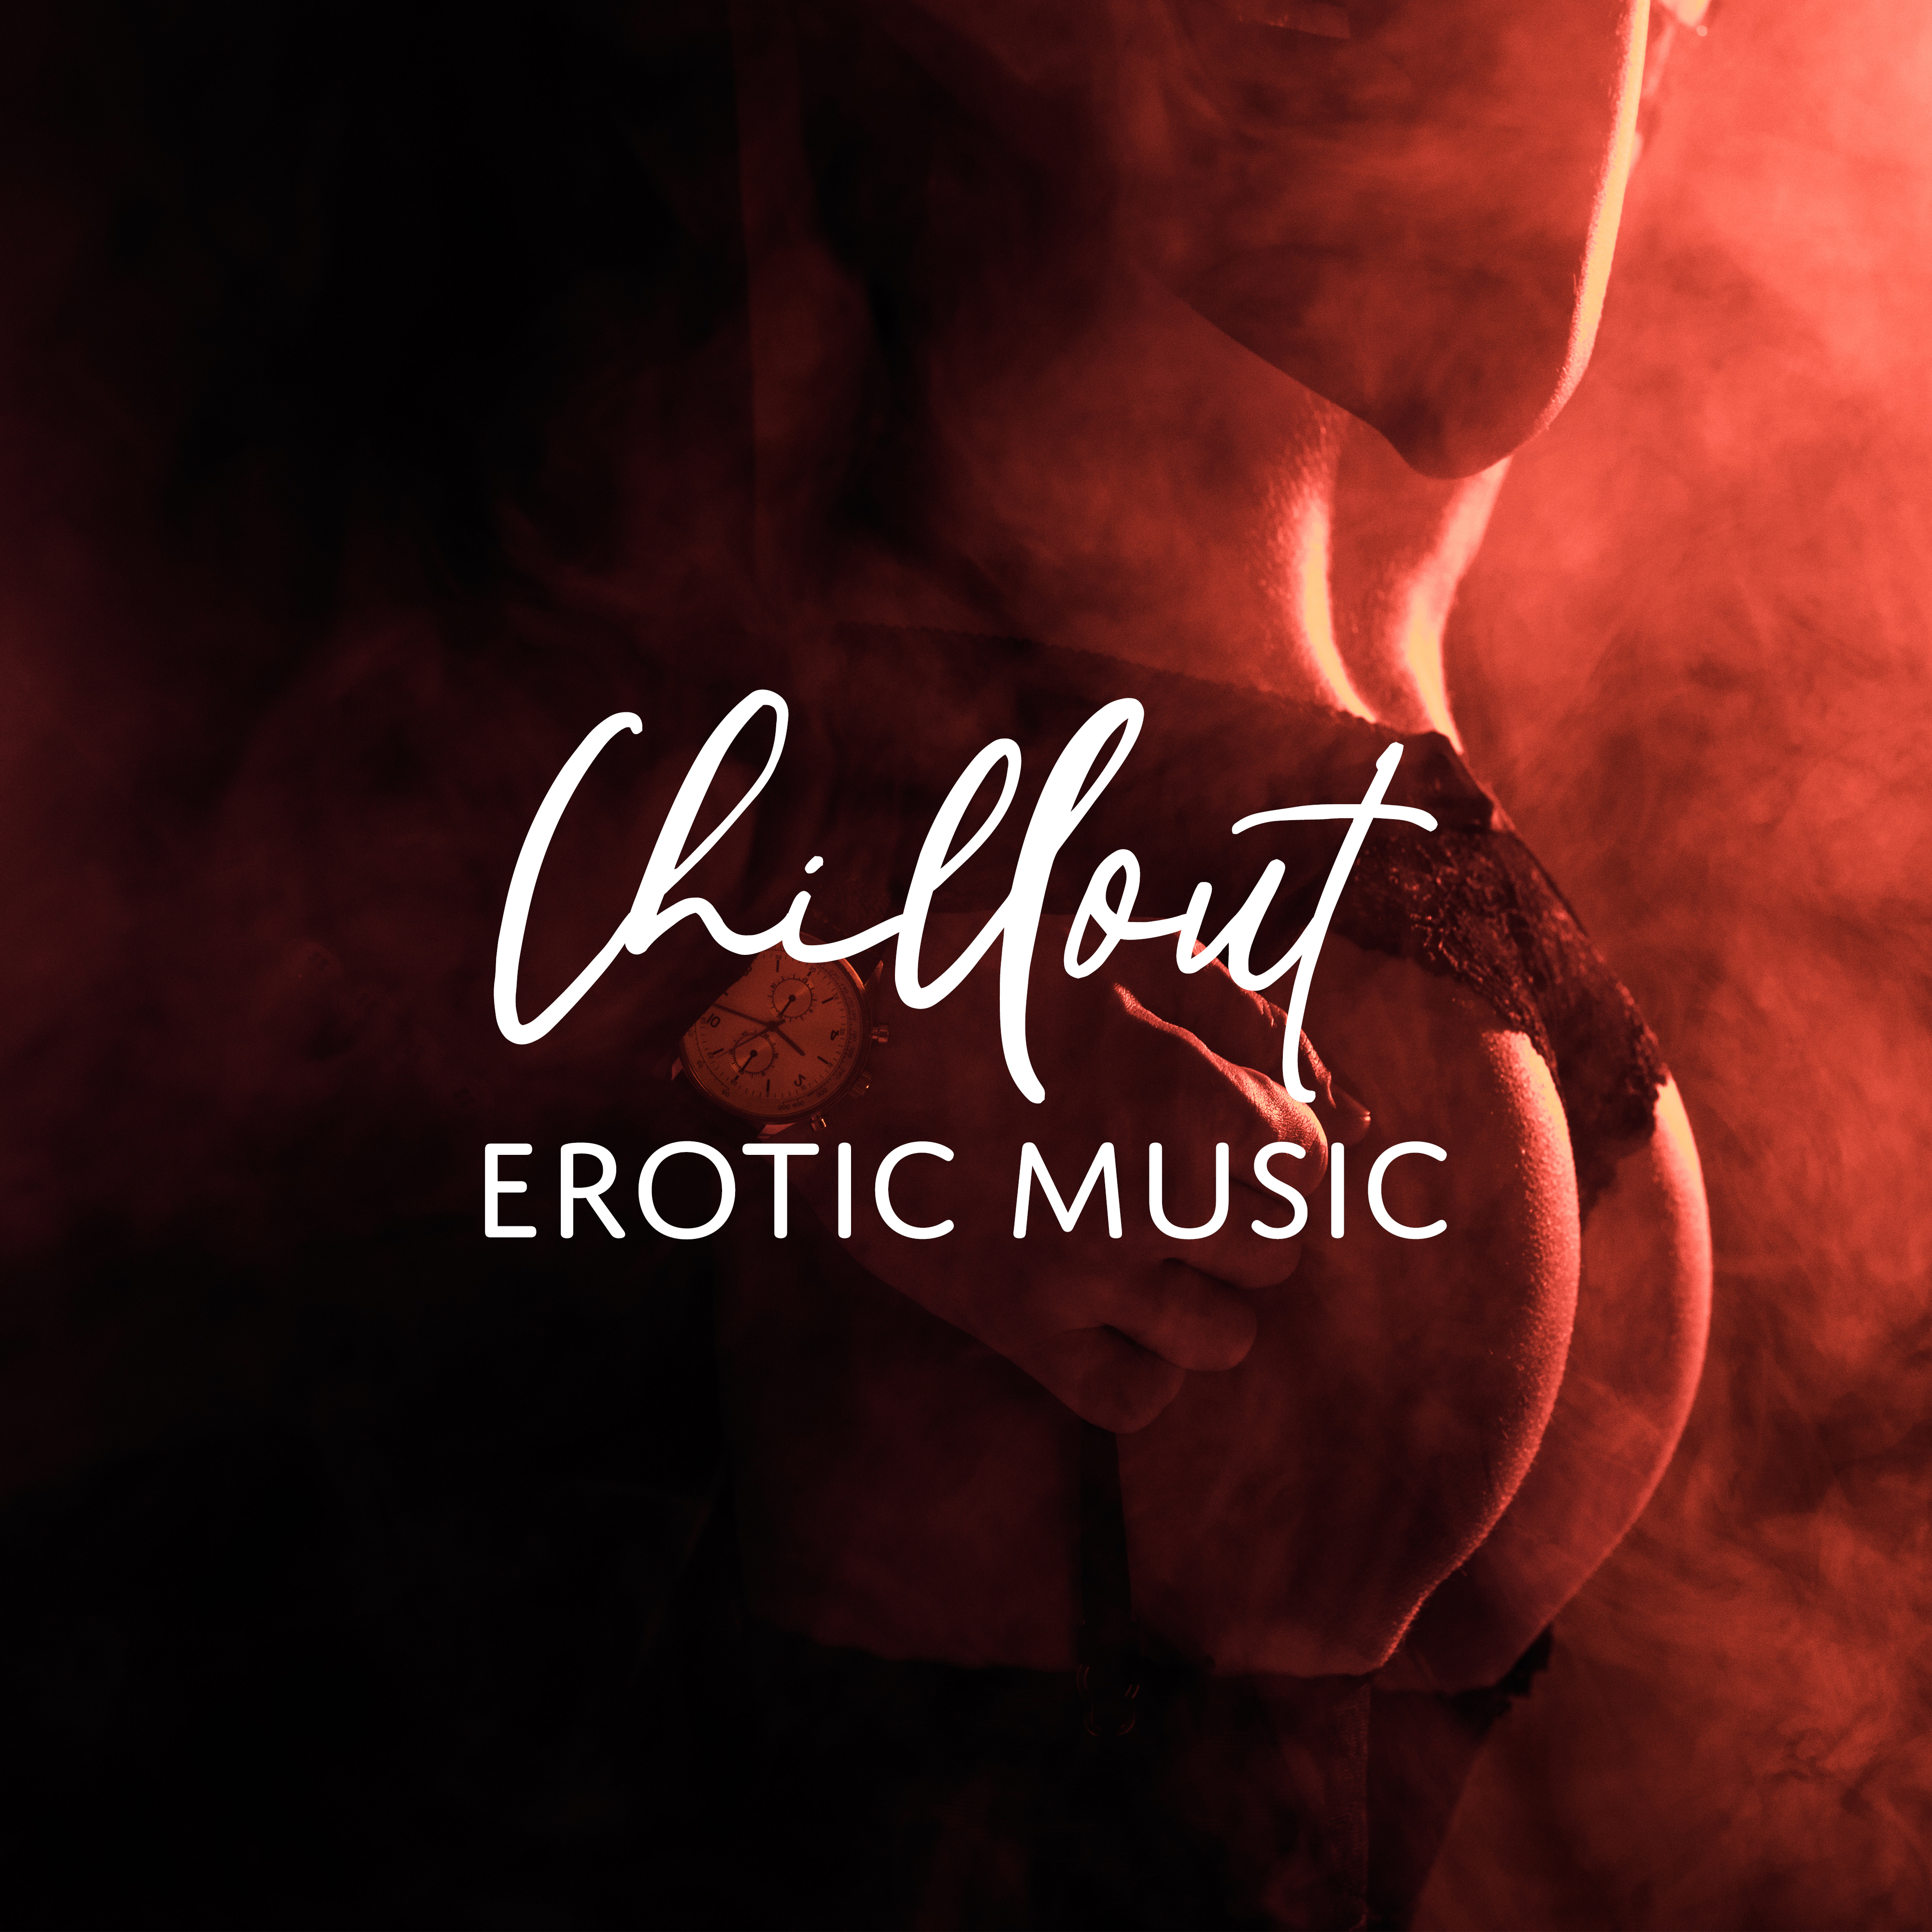 Chillout Erotic Music